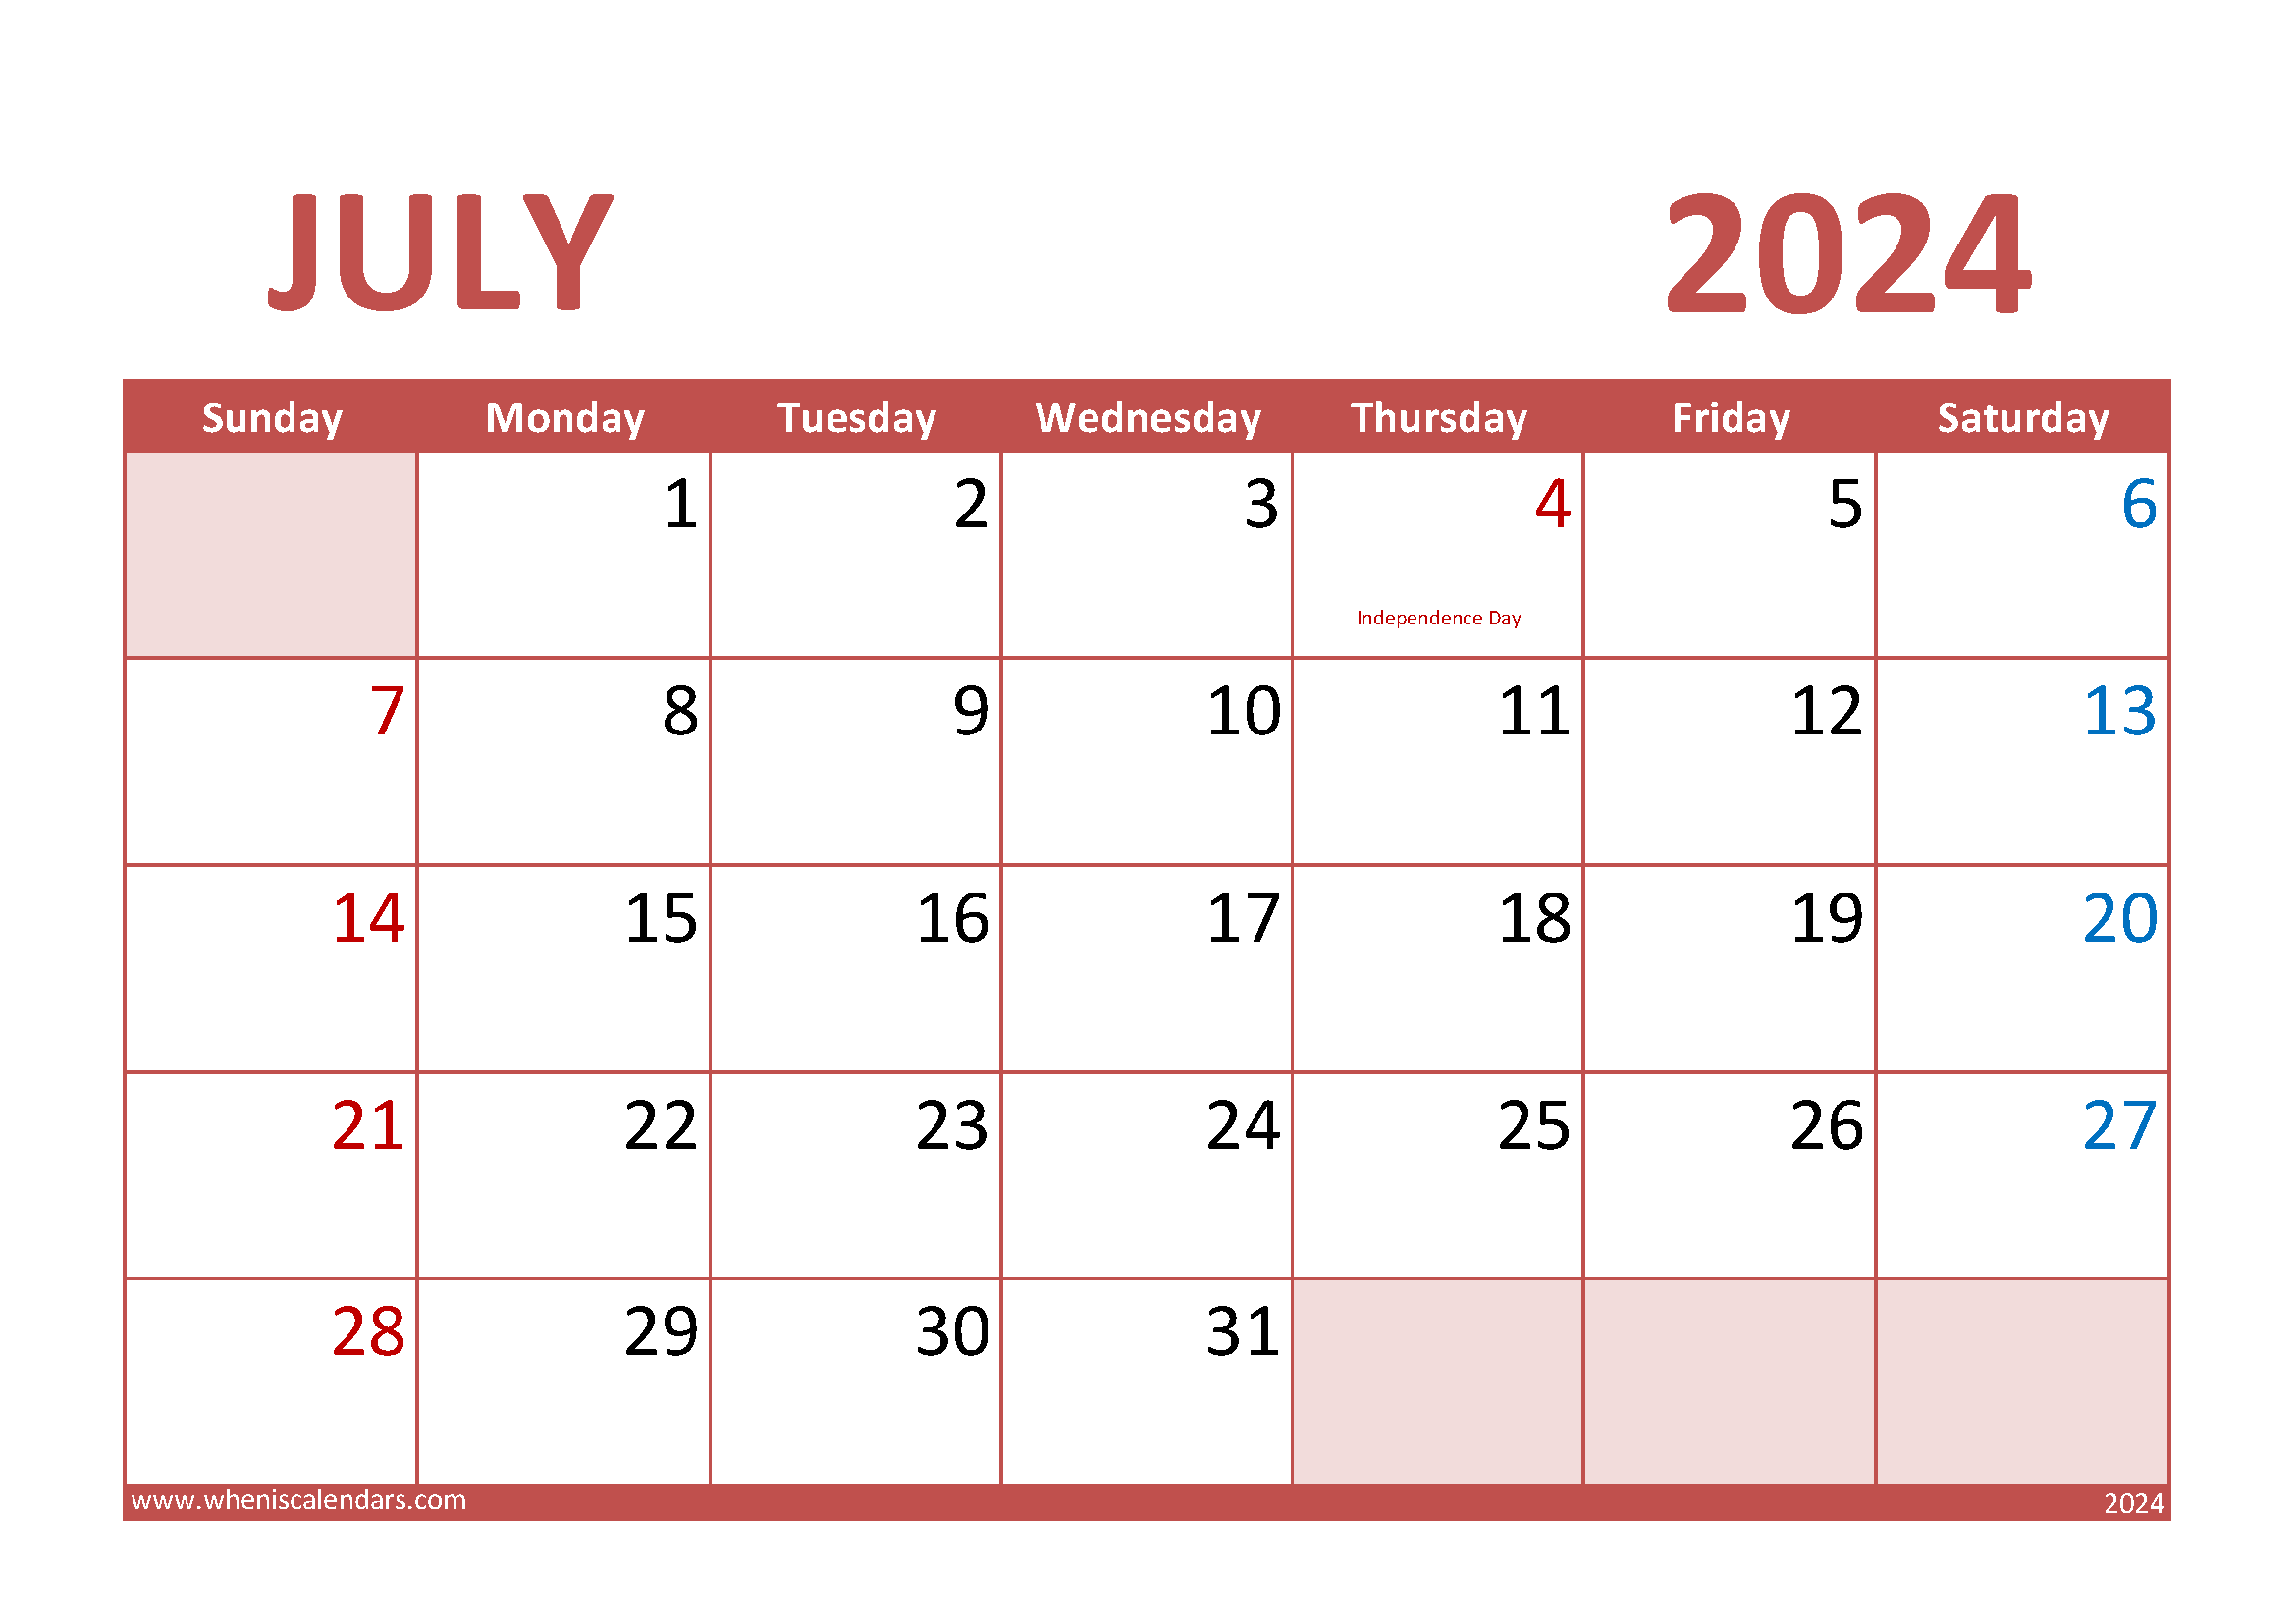 Special Days in July 2024